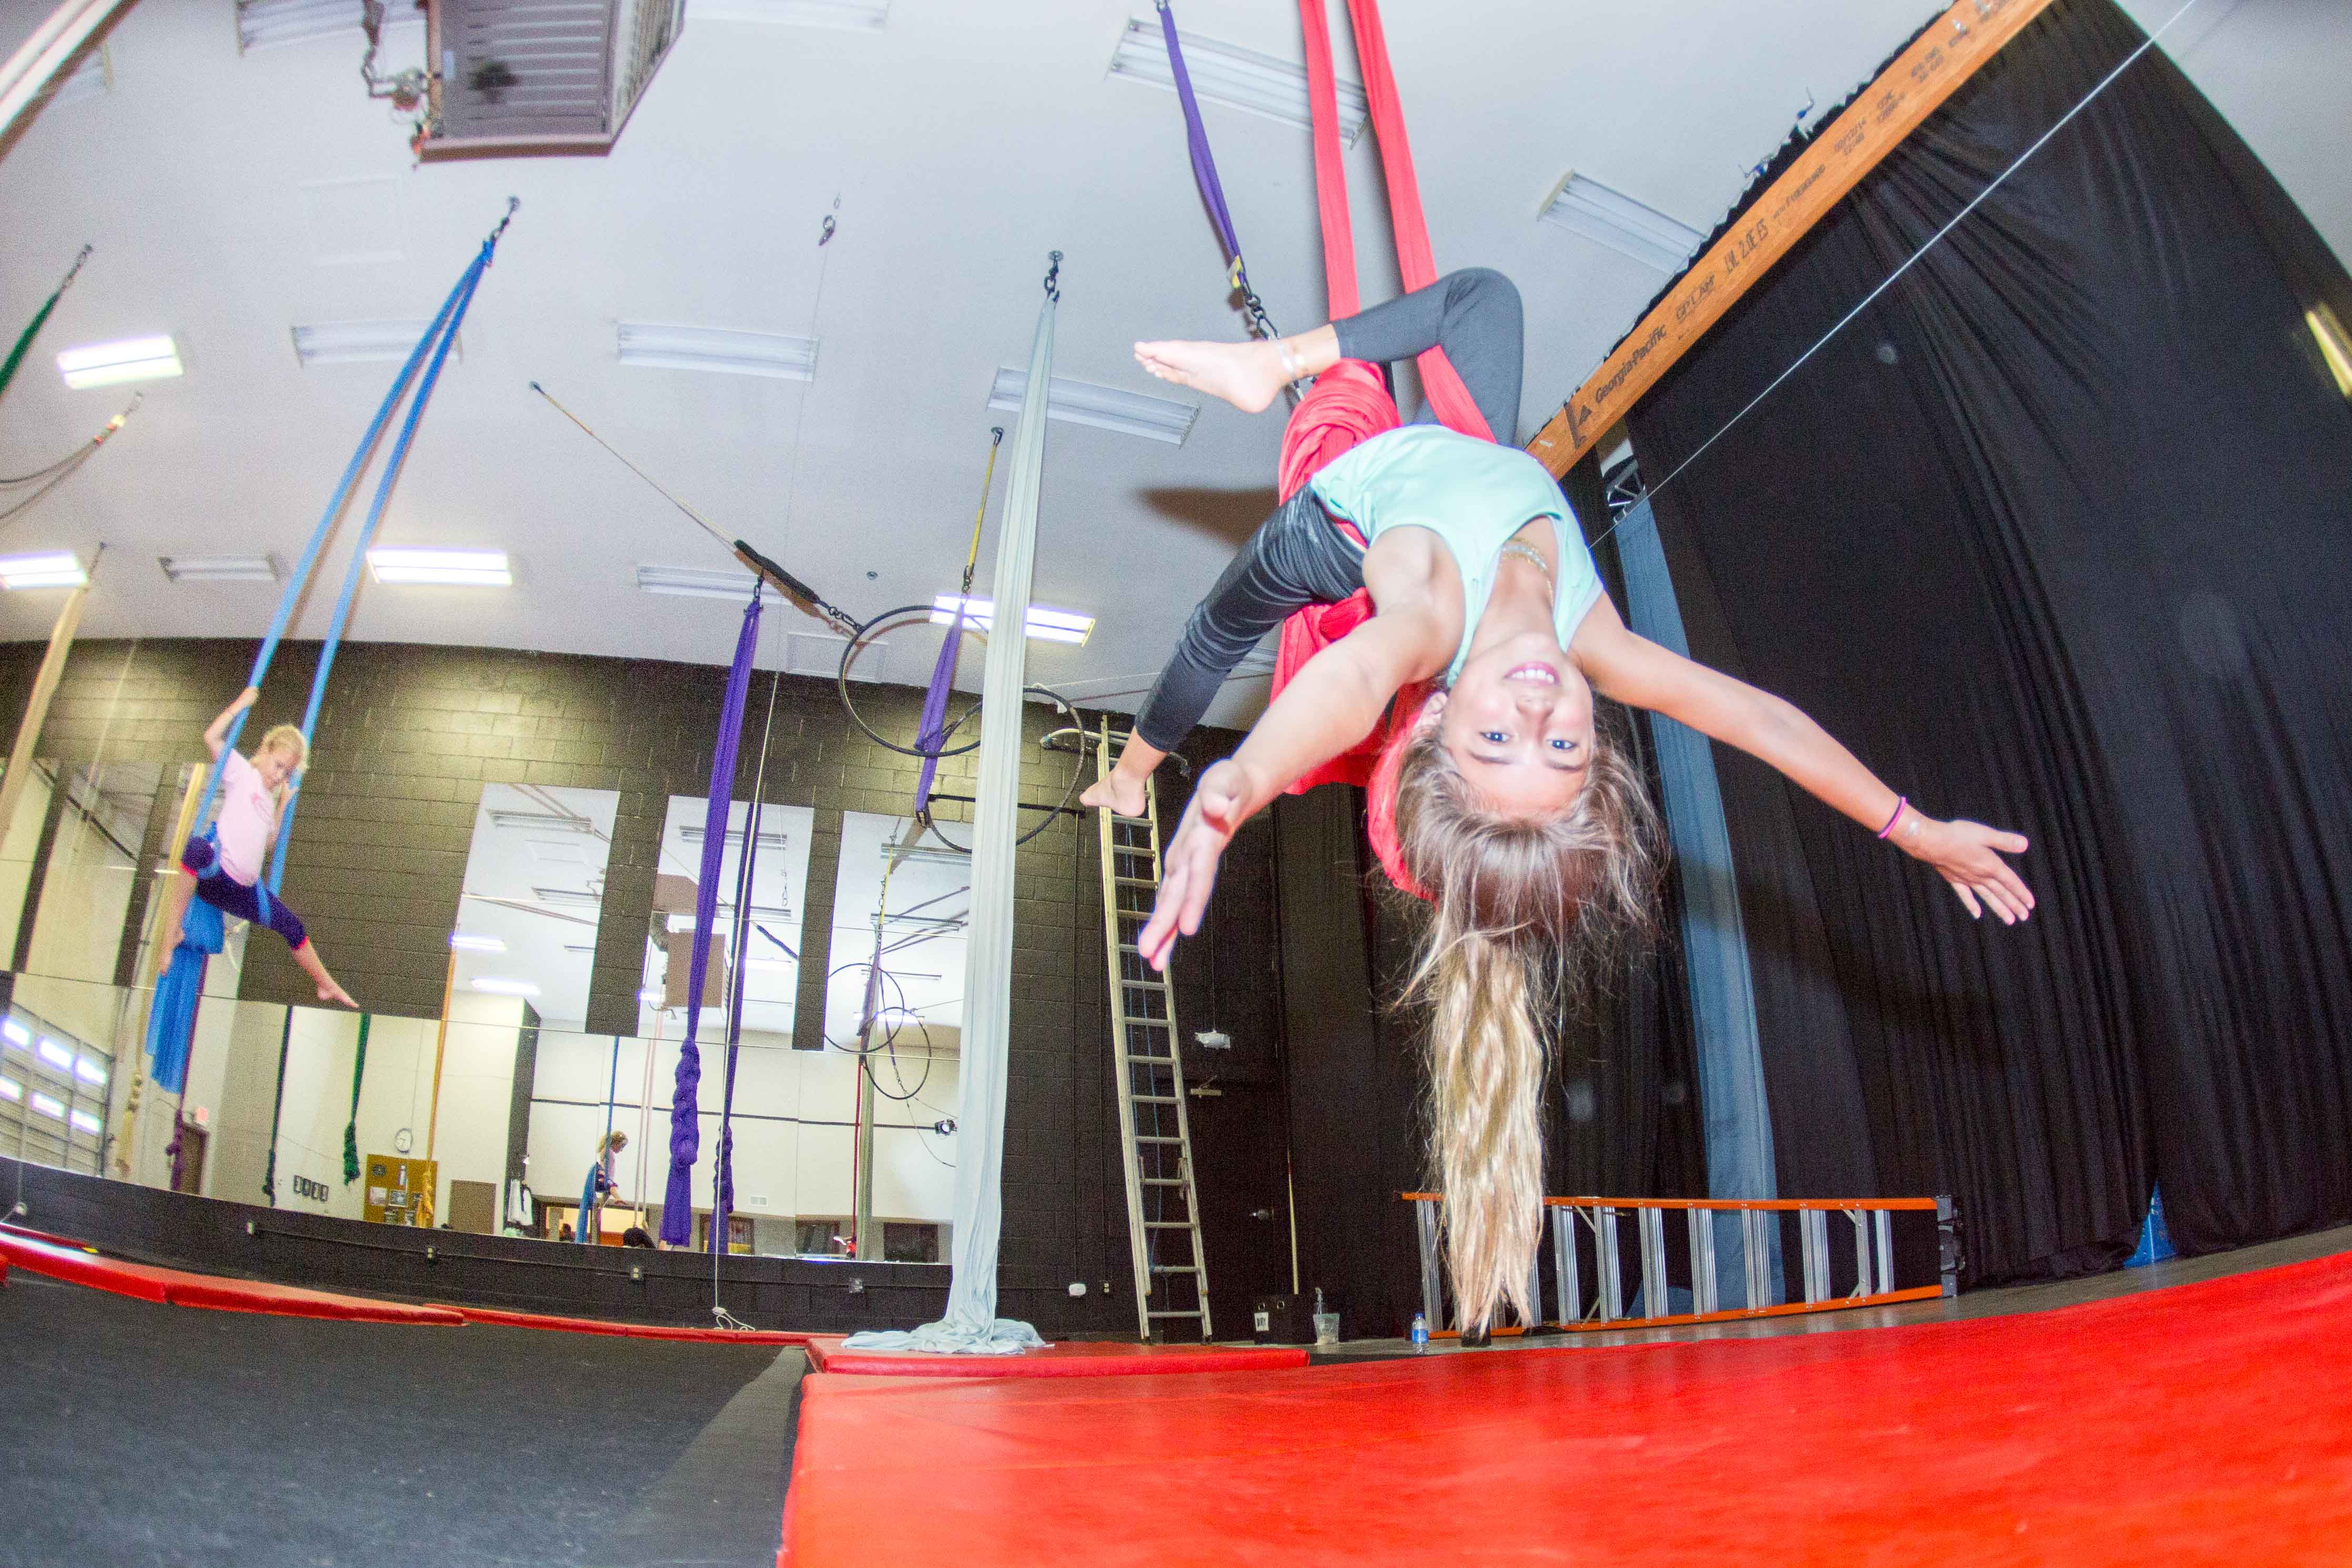 AerialCLT Aerial and Circus Summer Camp Charlotte Parent